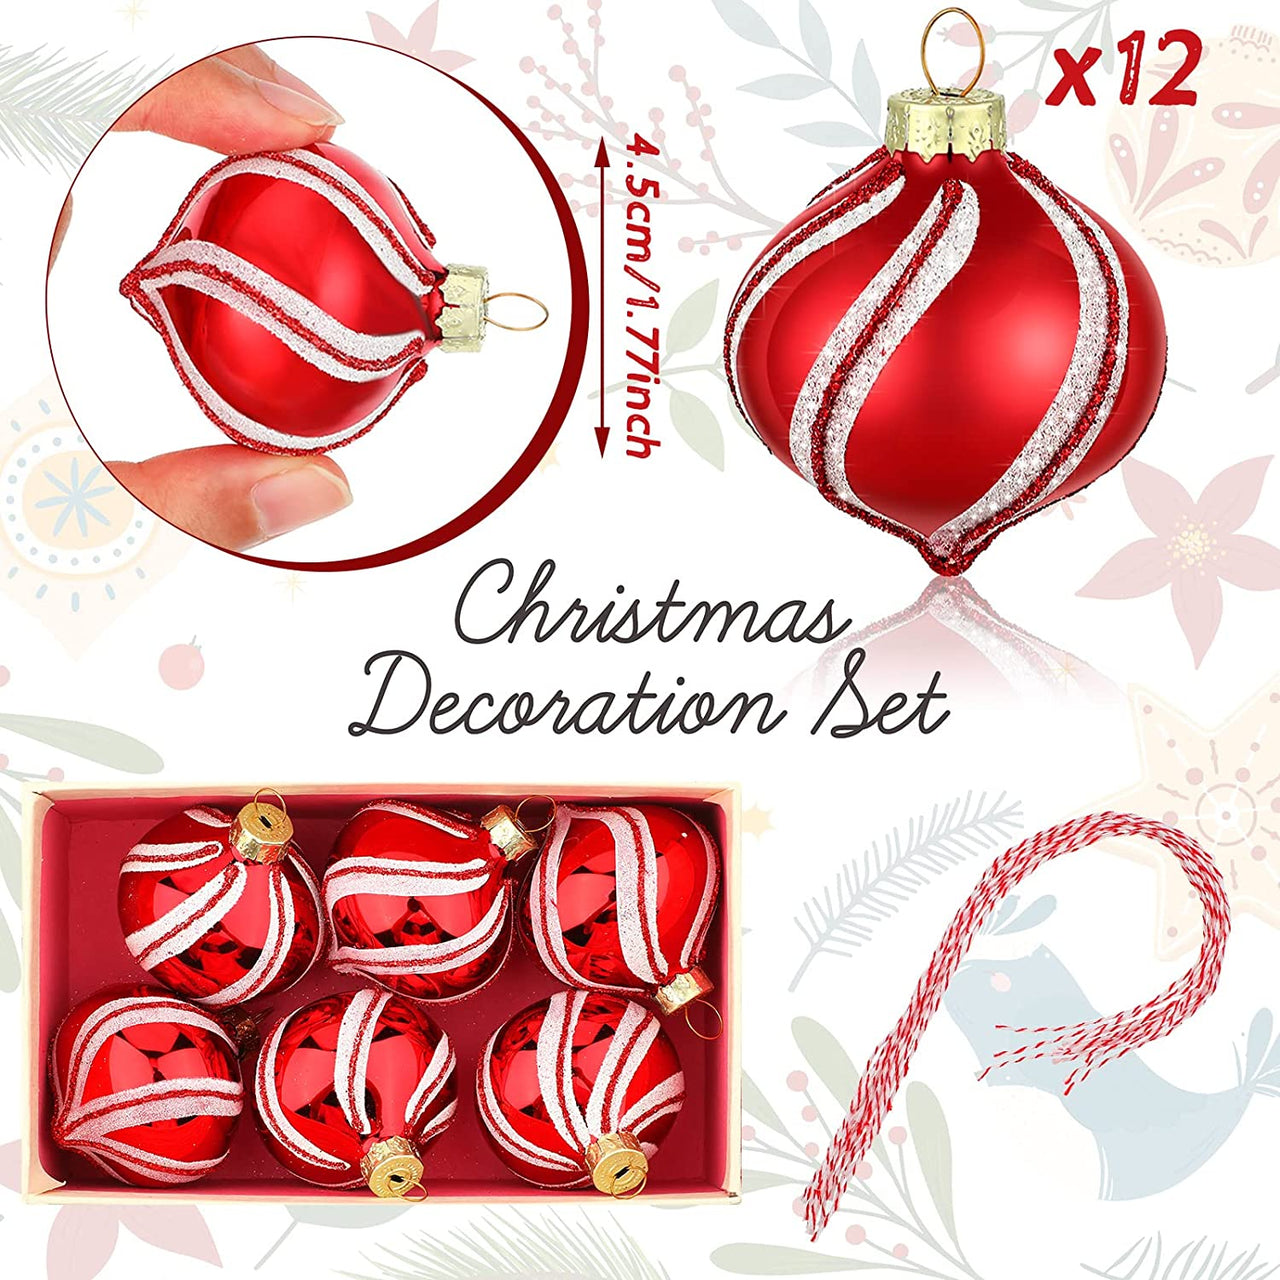 12 Pcs Peppermint Candy Ornament Set Christmas Candy Cane Balls Ornaments Christmas Candy Cane Decorations White Red Christmas Balls Mini Glass Ornaments for Indoor Outdoor Tree Decor